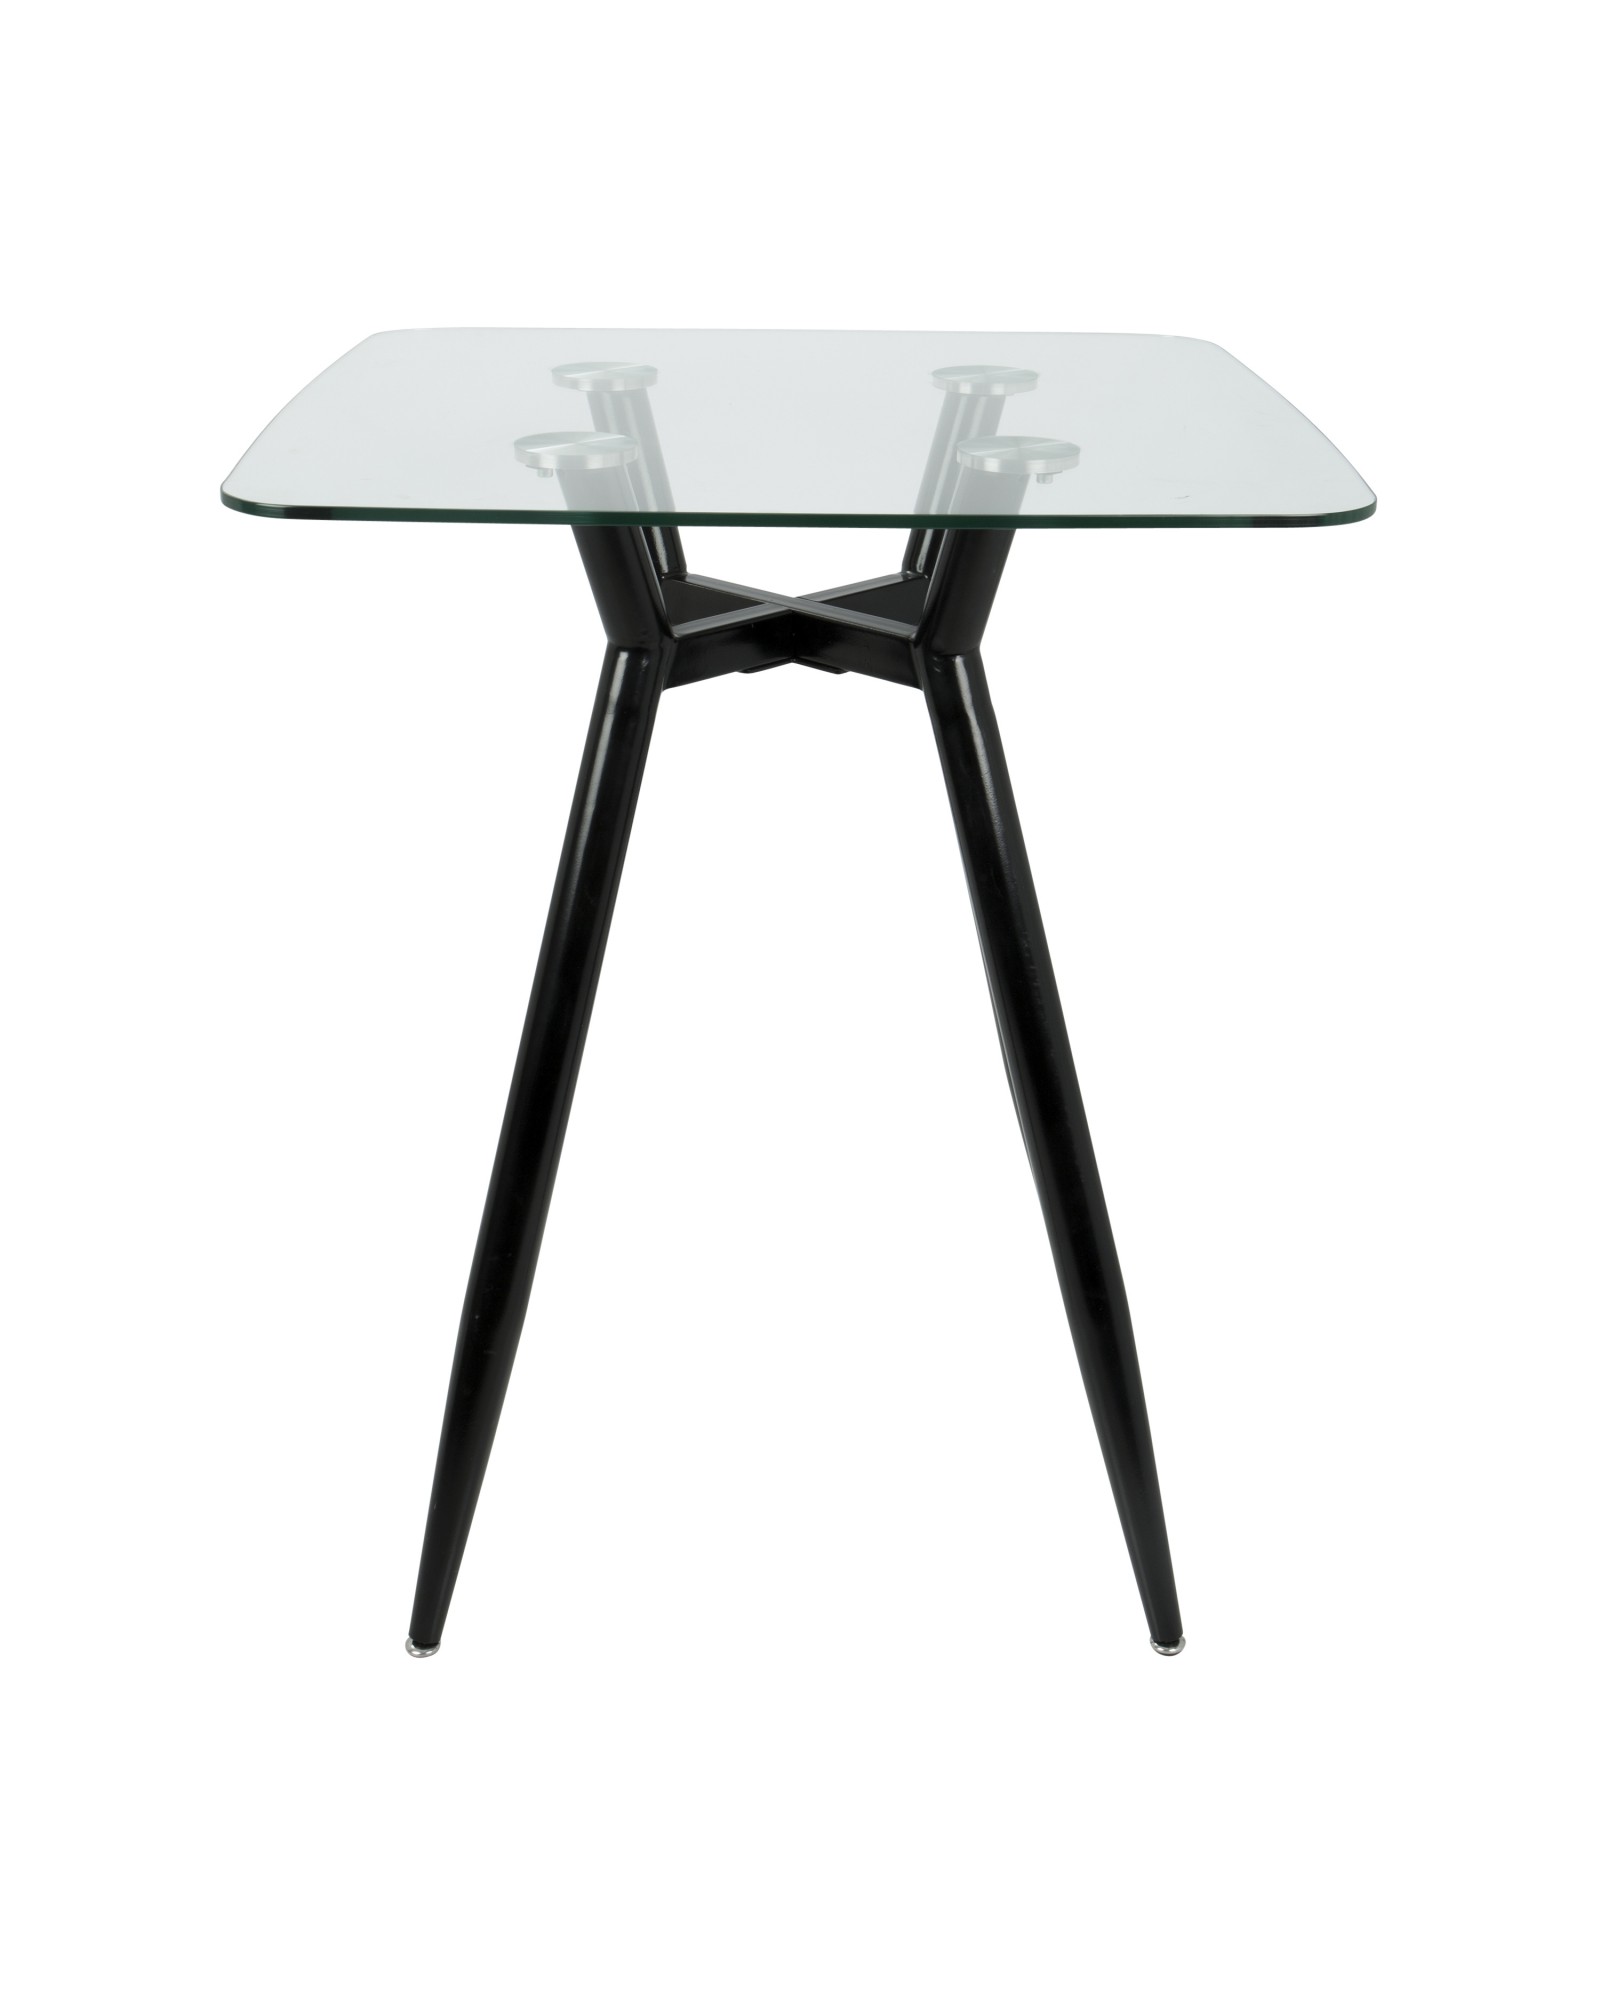 Clara Mid-Century Modern Square Counter Table with Black Metal Legs and Clear Glass Top